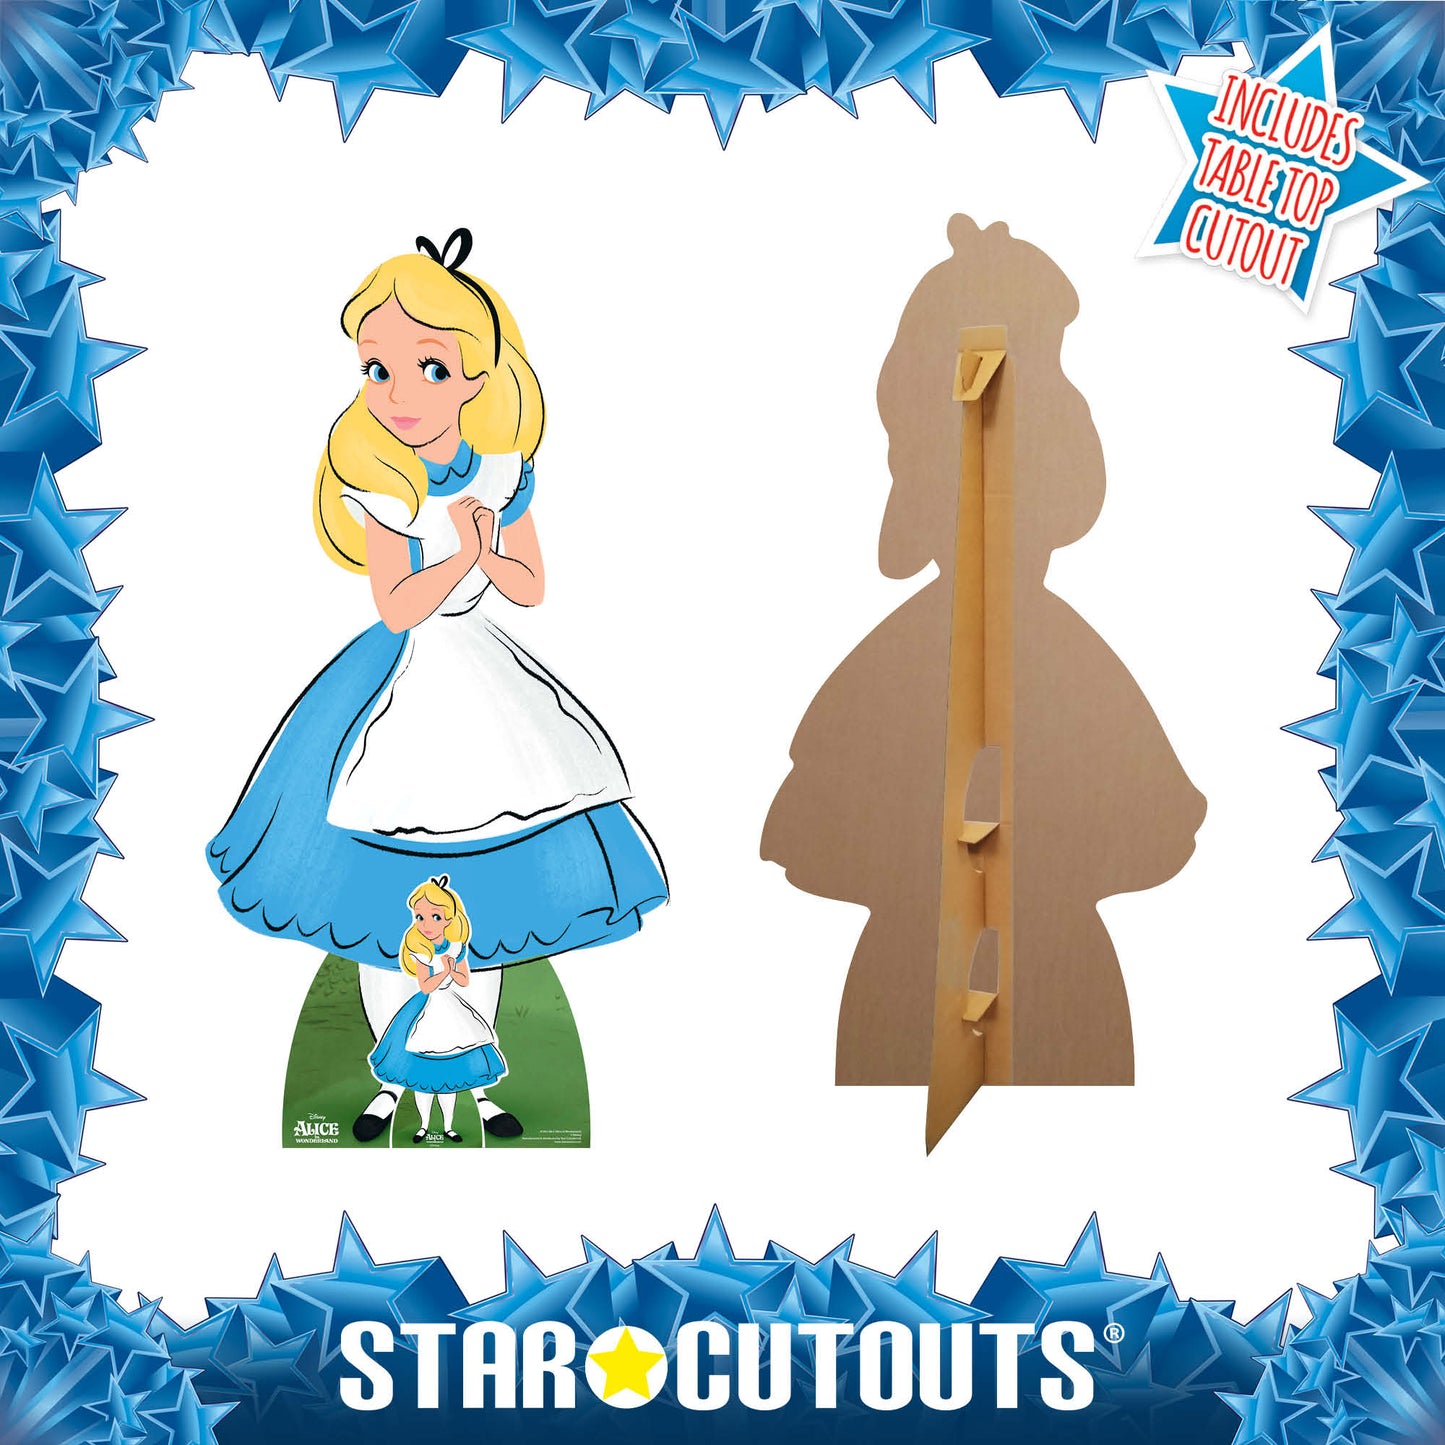 Alice Classic Alice in Wonderland Cardboard Cutout Disney Official Product